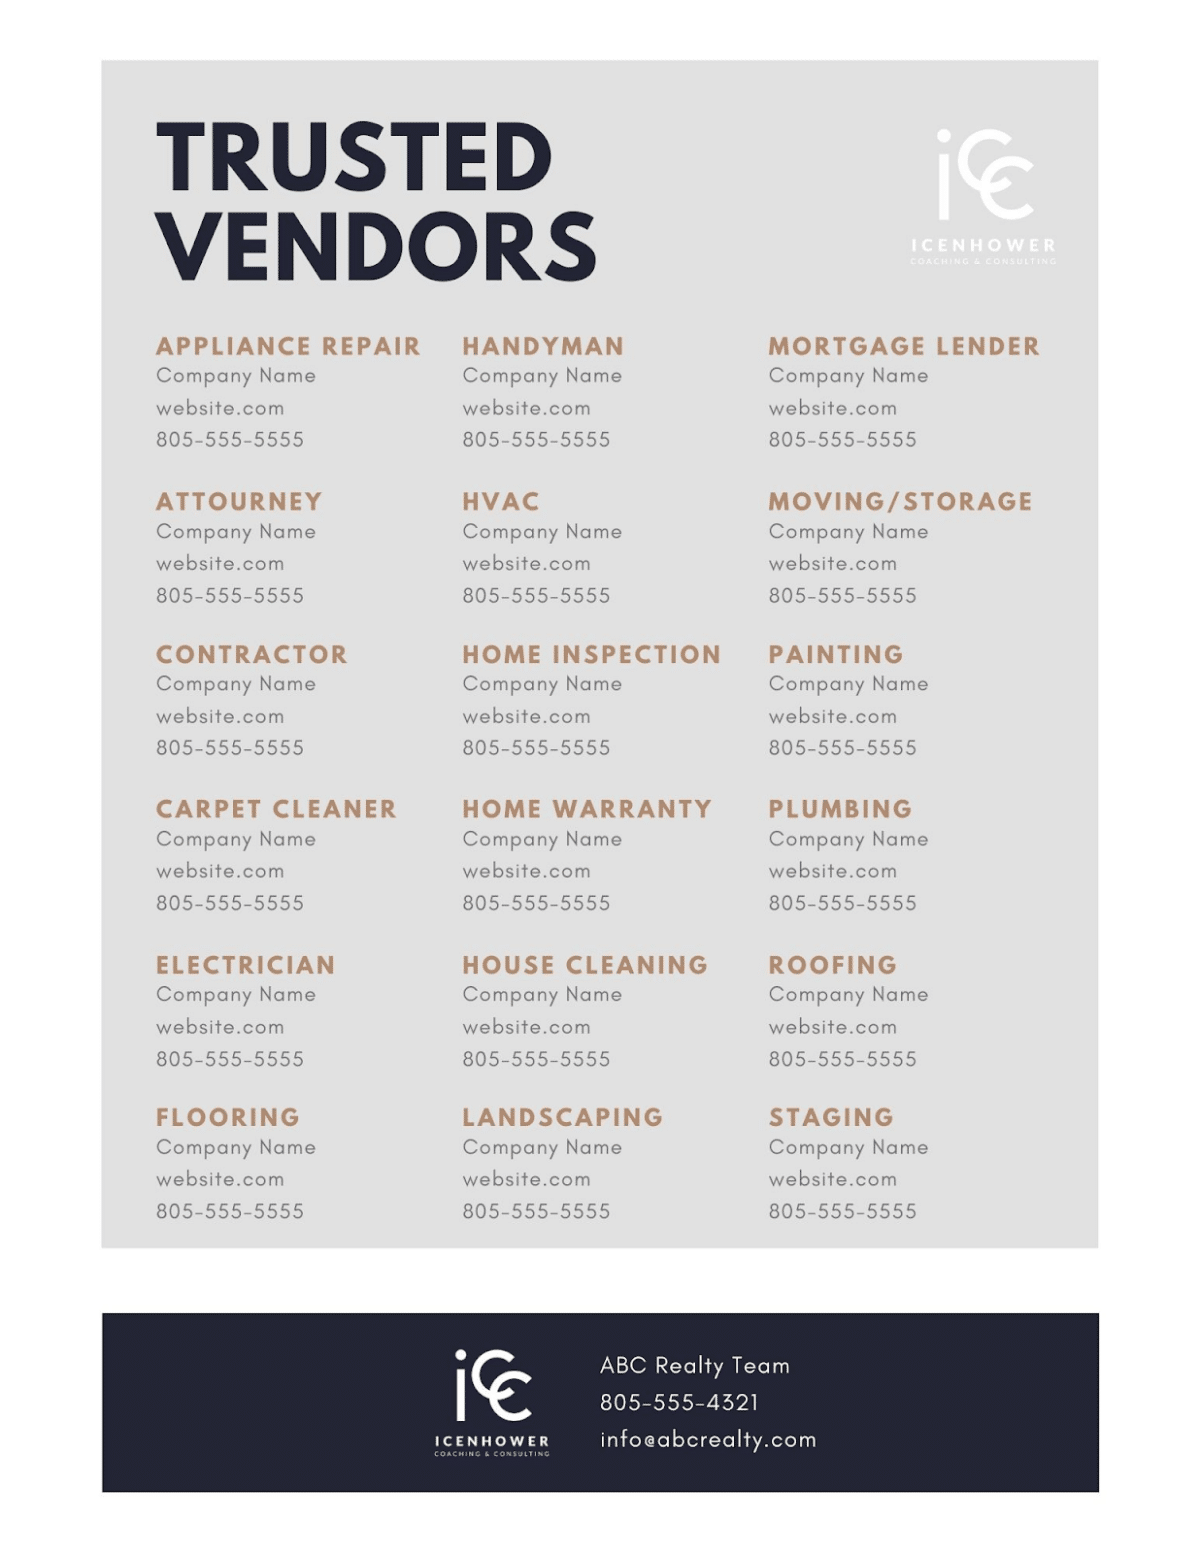 Organized list of vendor contacts for clients.